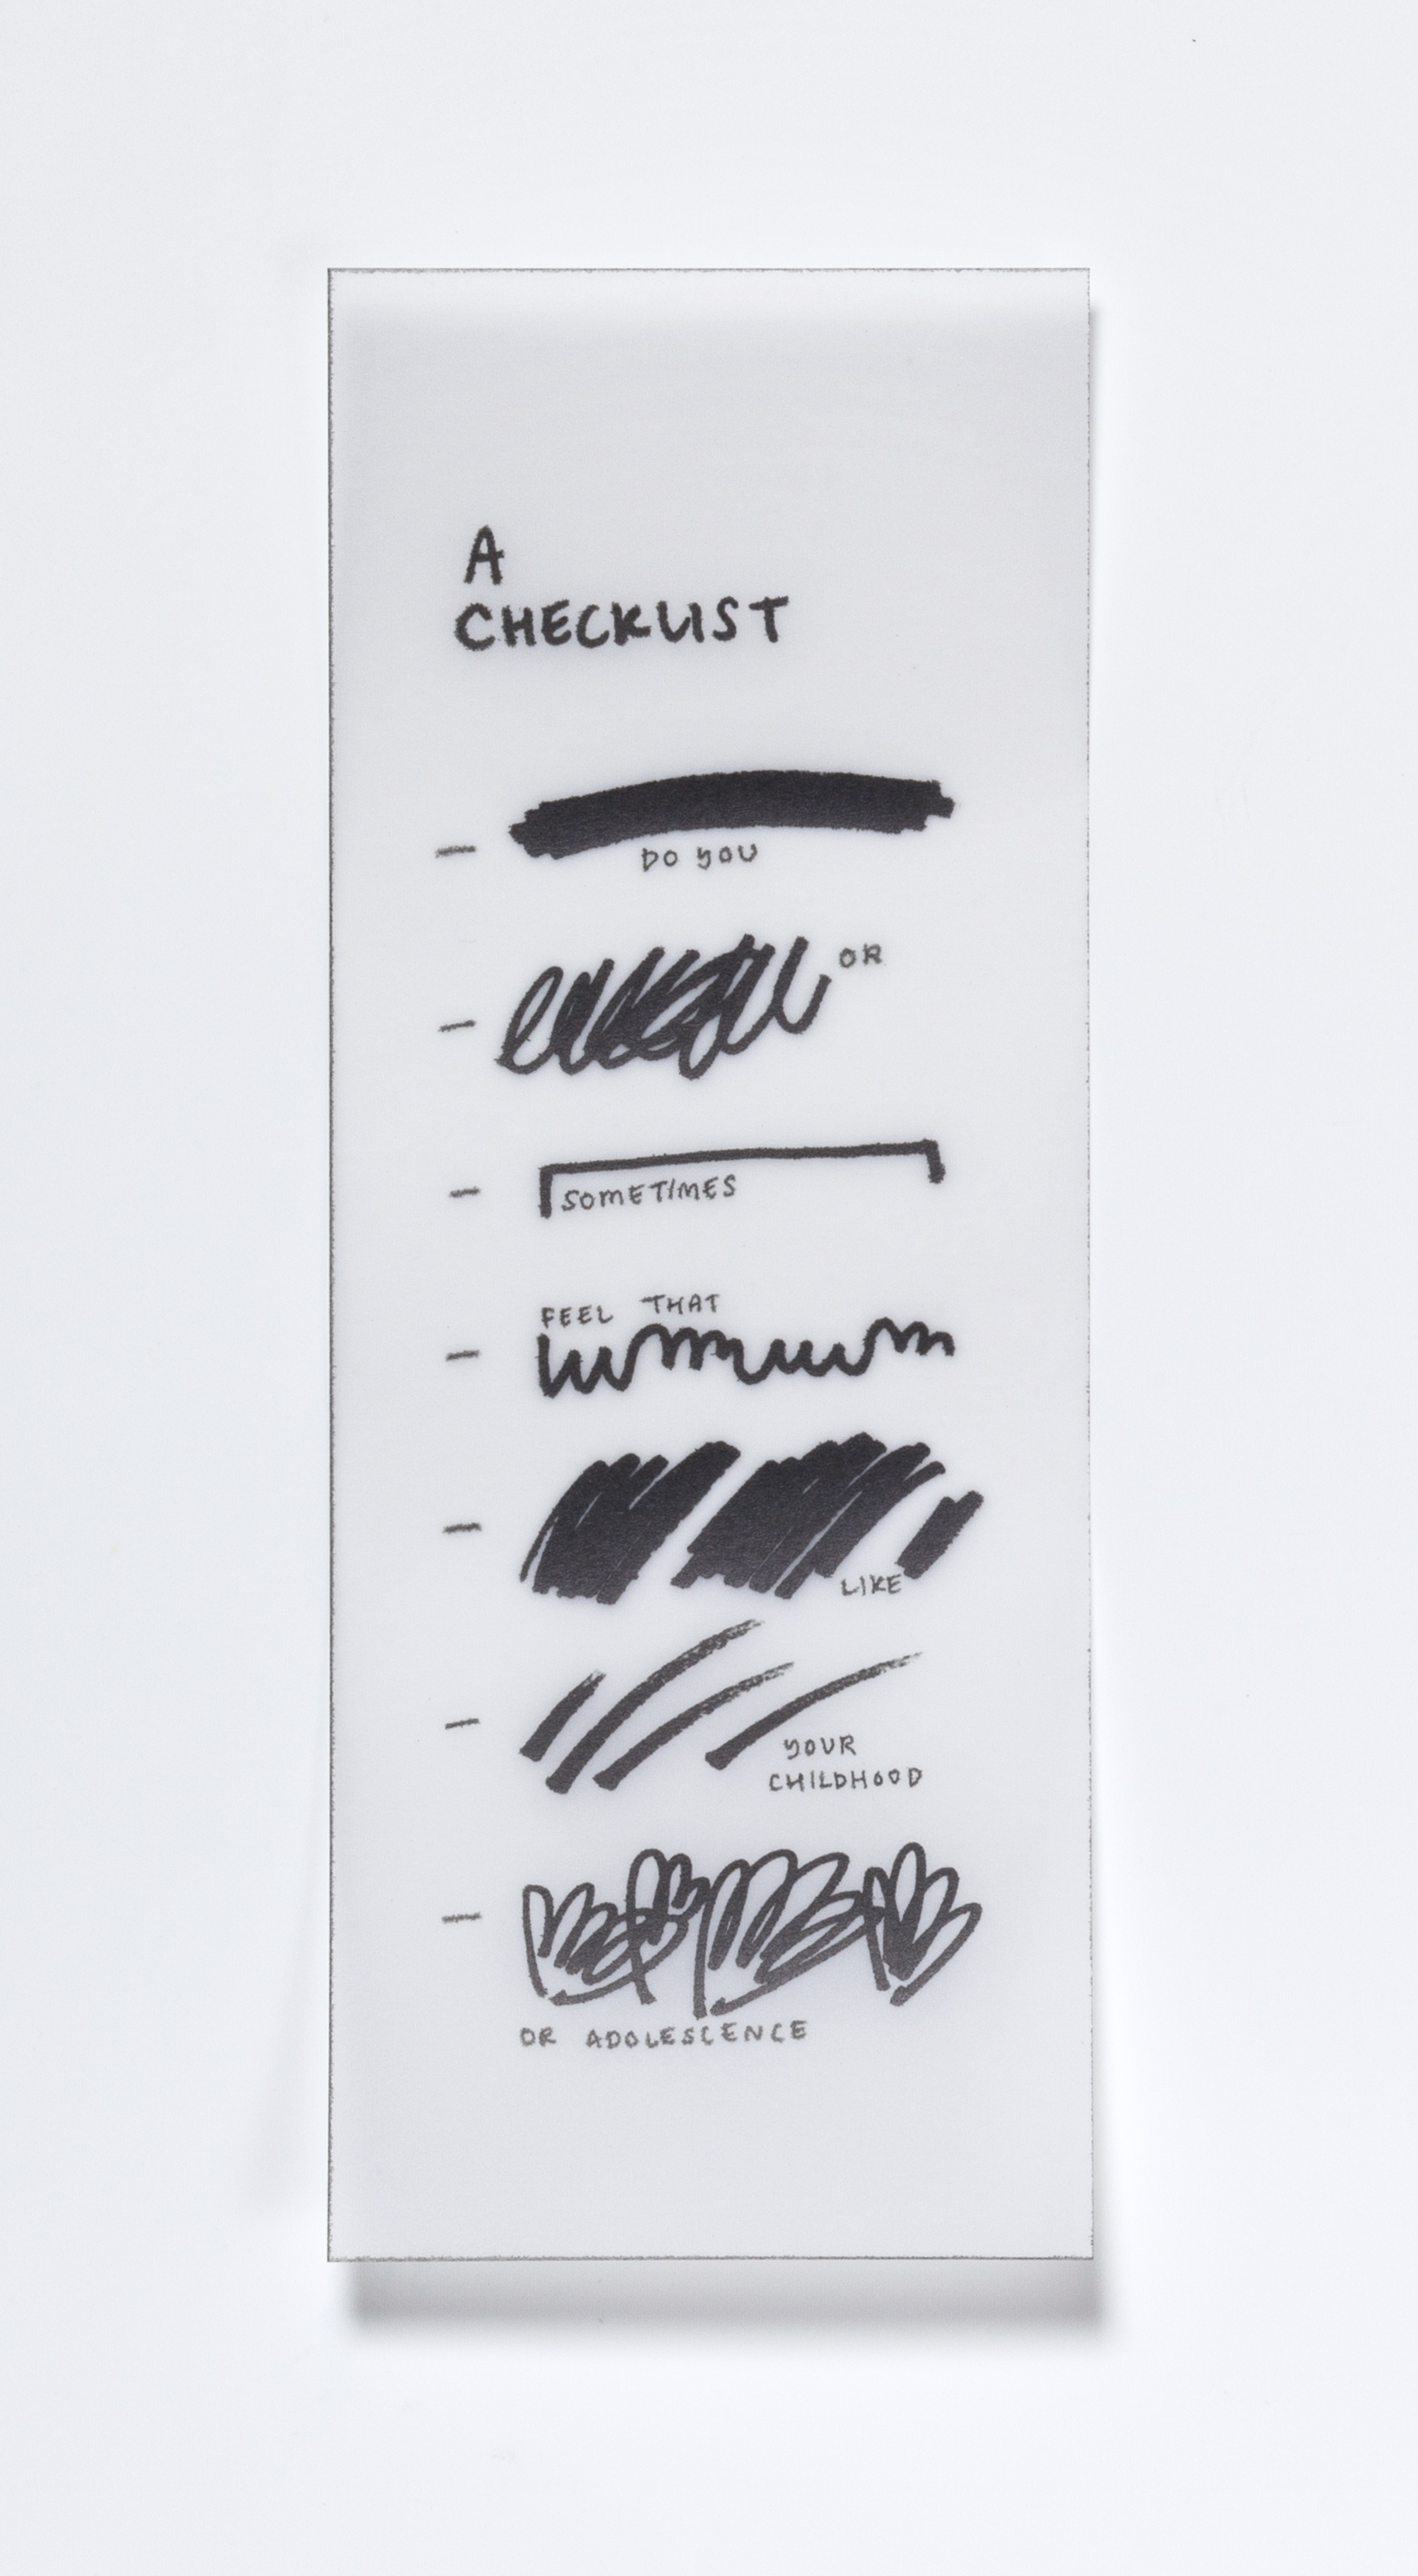    A Checklist,  2018  Inkjet print on paper 8 7/16 x 3 1/4 inches 